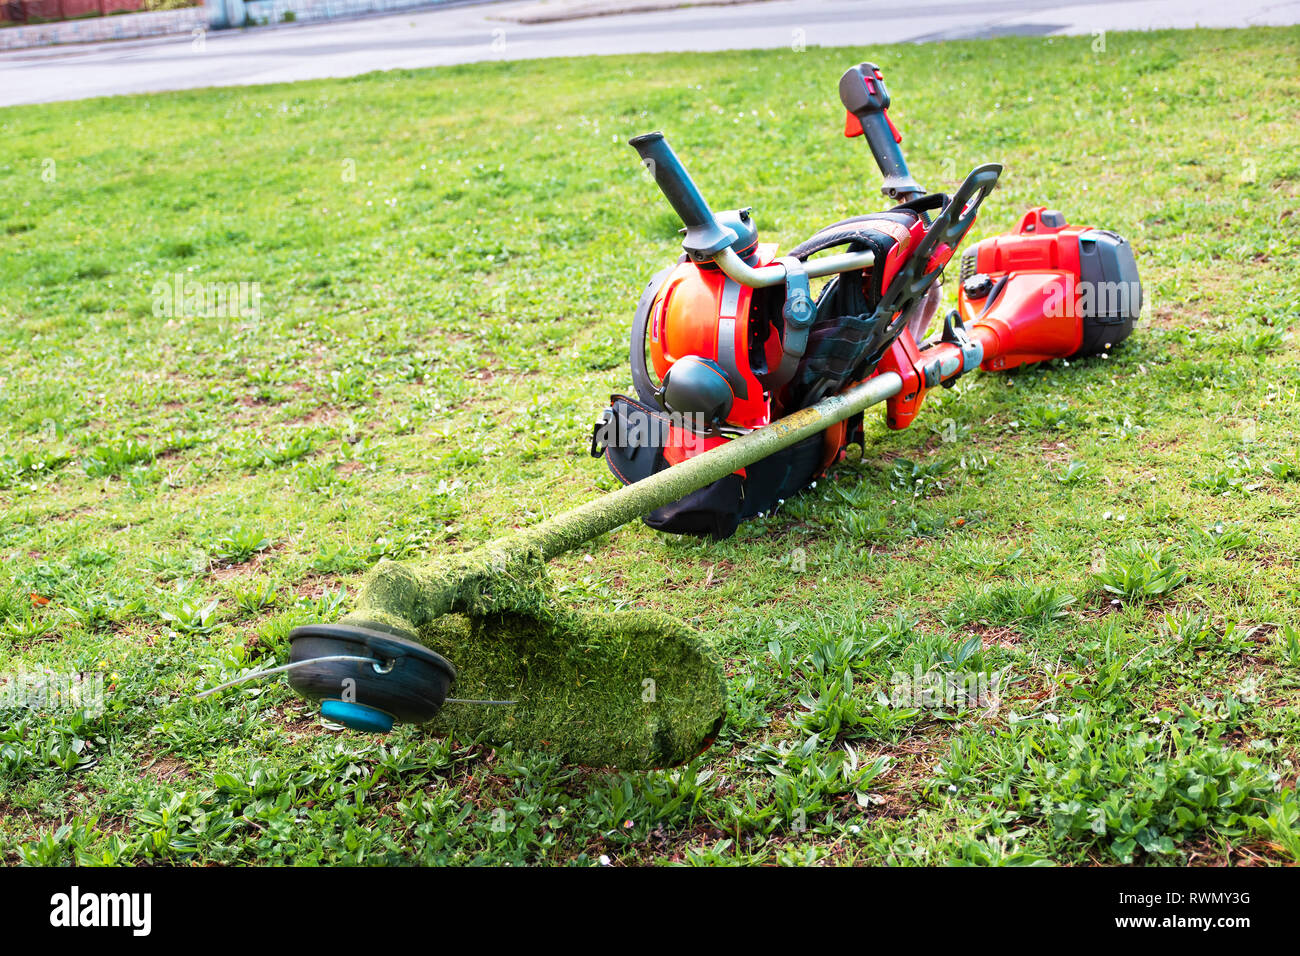 Grass cutter / Brush cutter, safety helmet and other equipment lay on the lawn Stock Photo